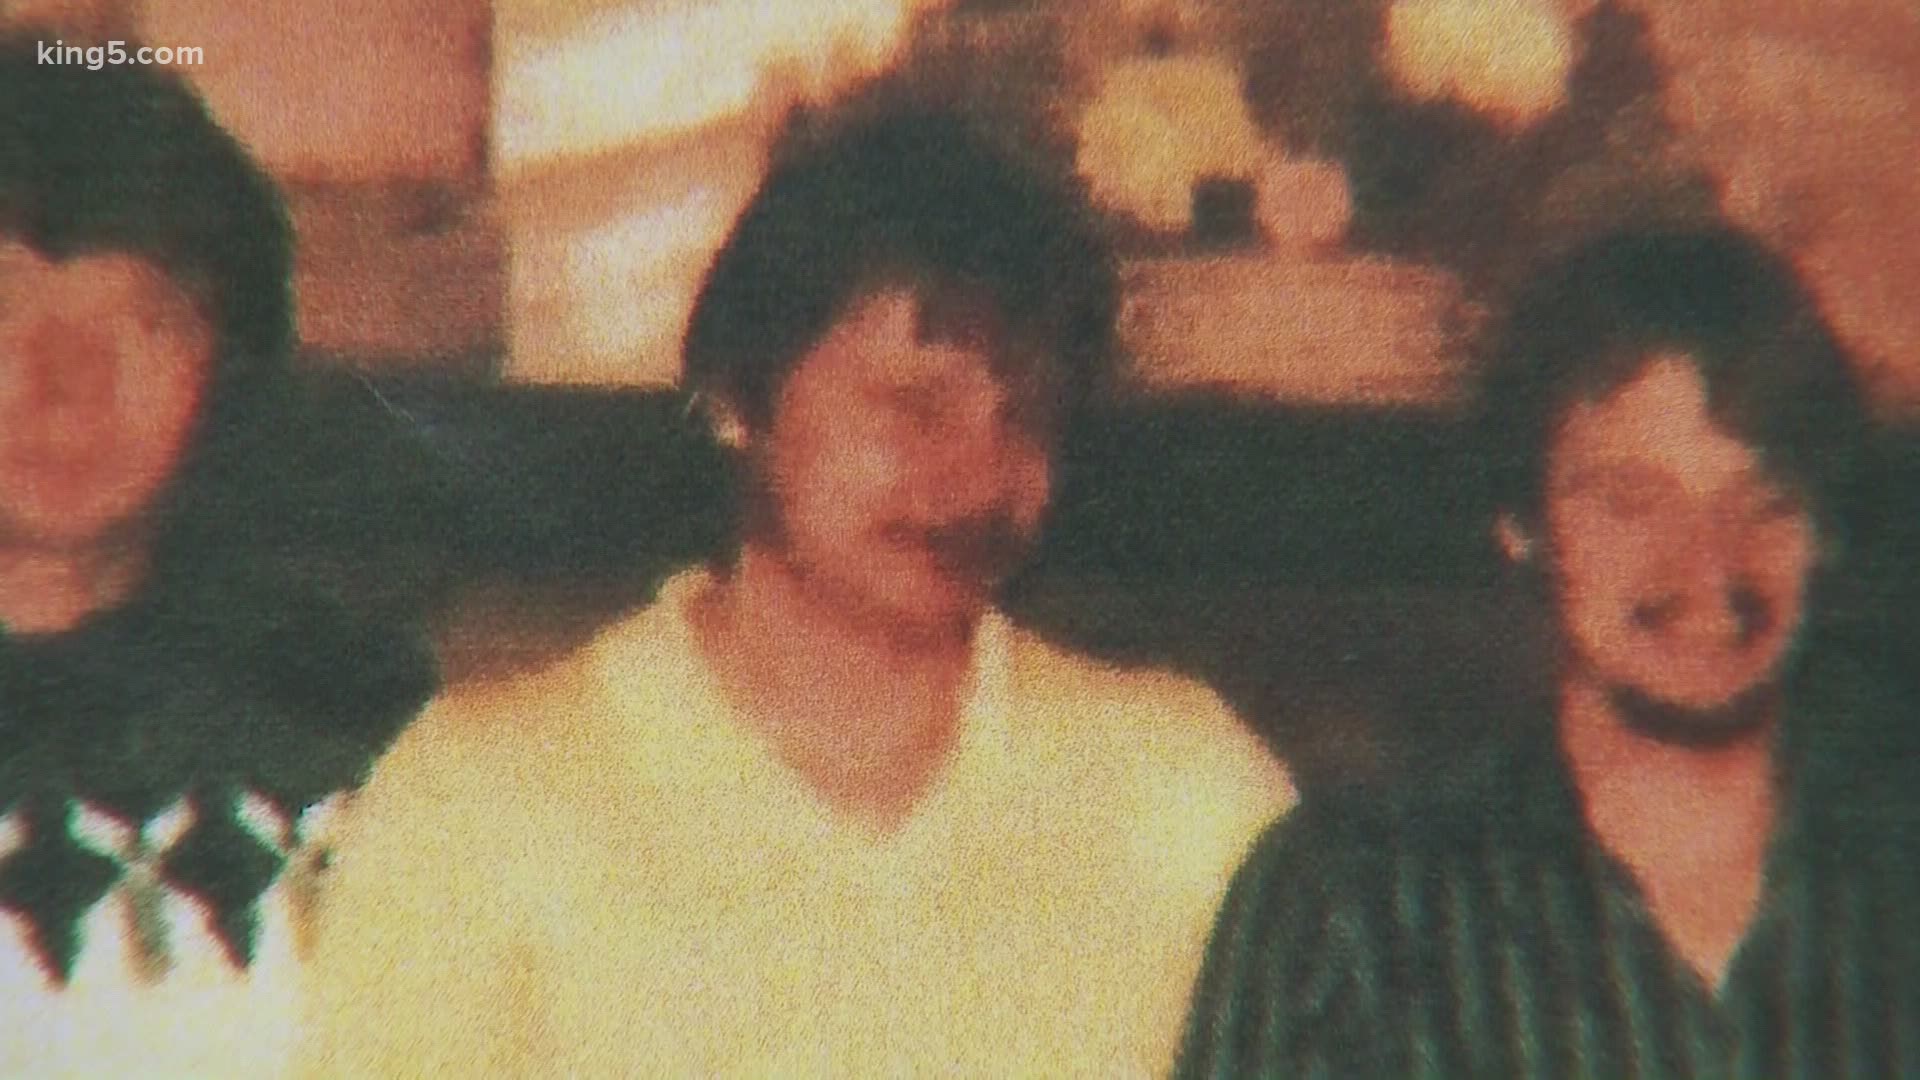 Rodney Peter Johnson's body was found in Lake Stickney in 1994, years after he went missing.